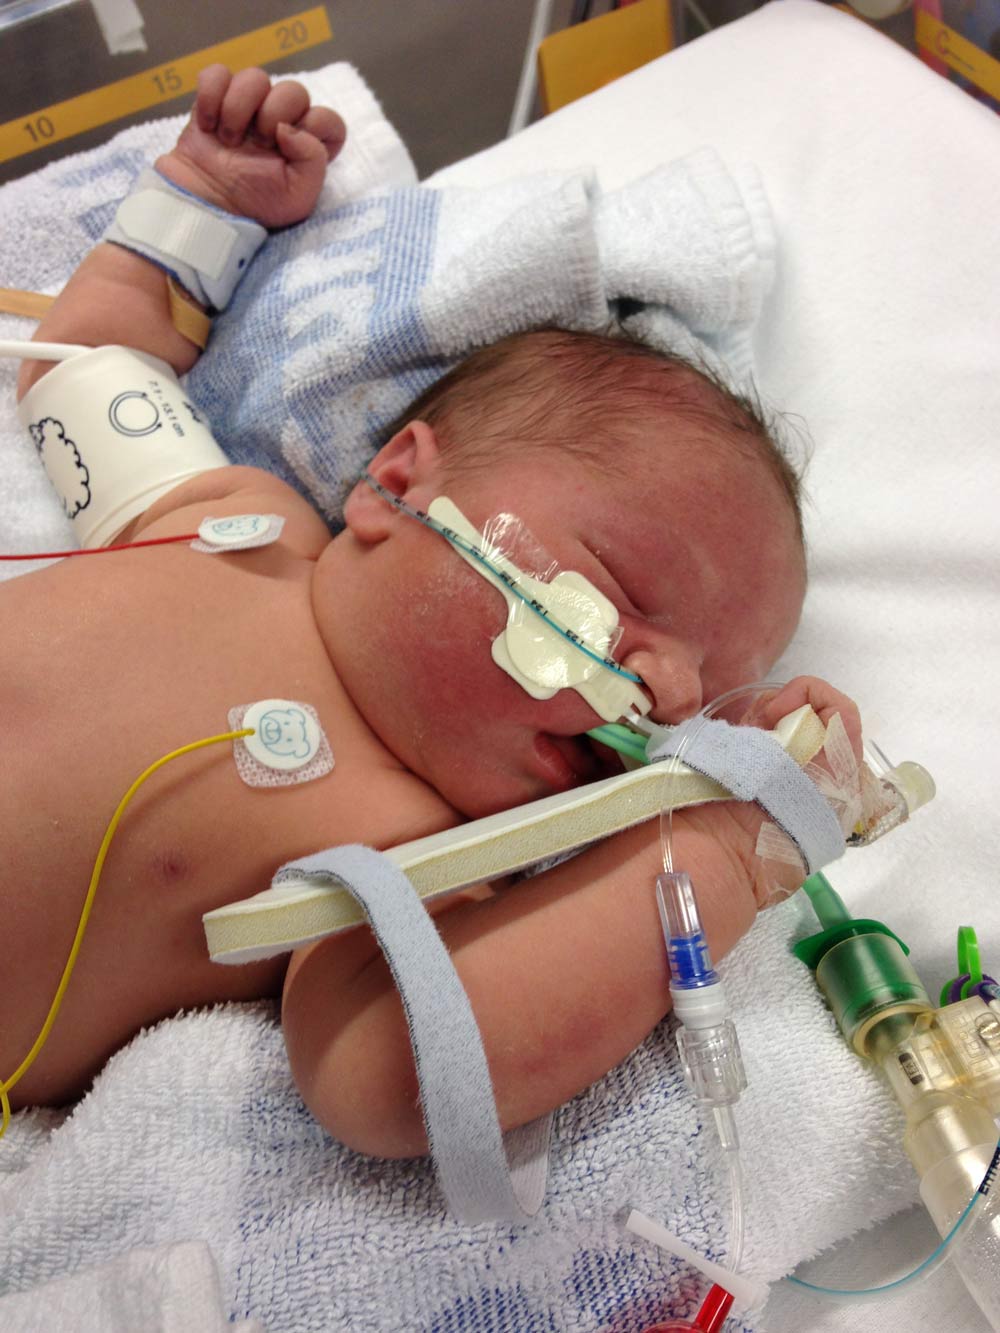 George had to undergo open heart surgery within his first few days of life